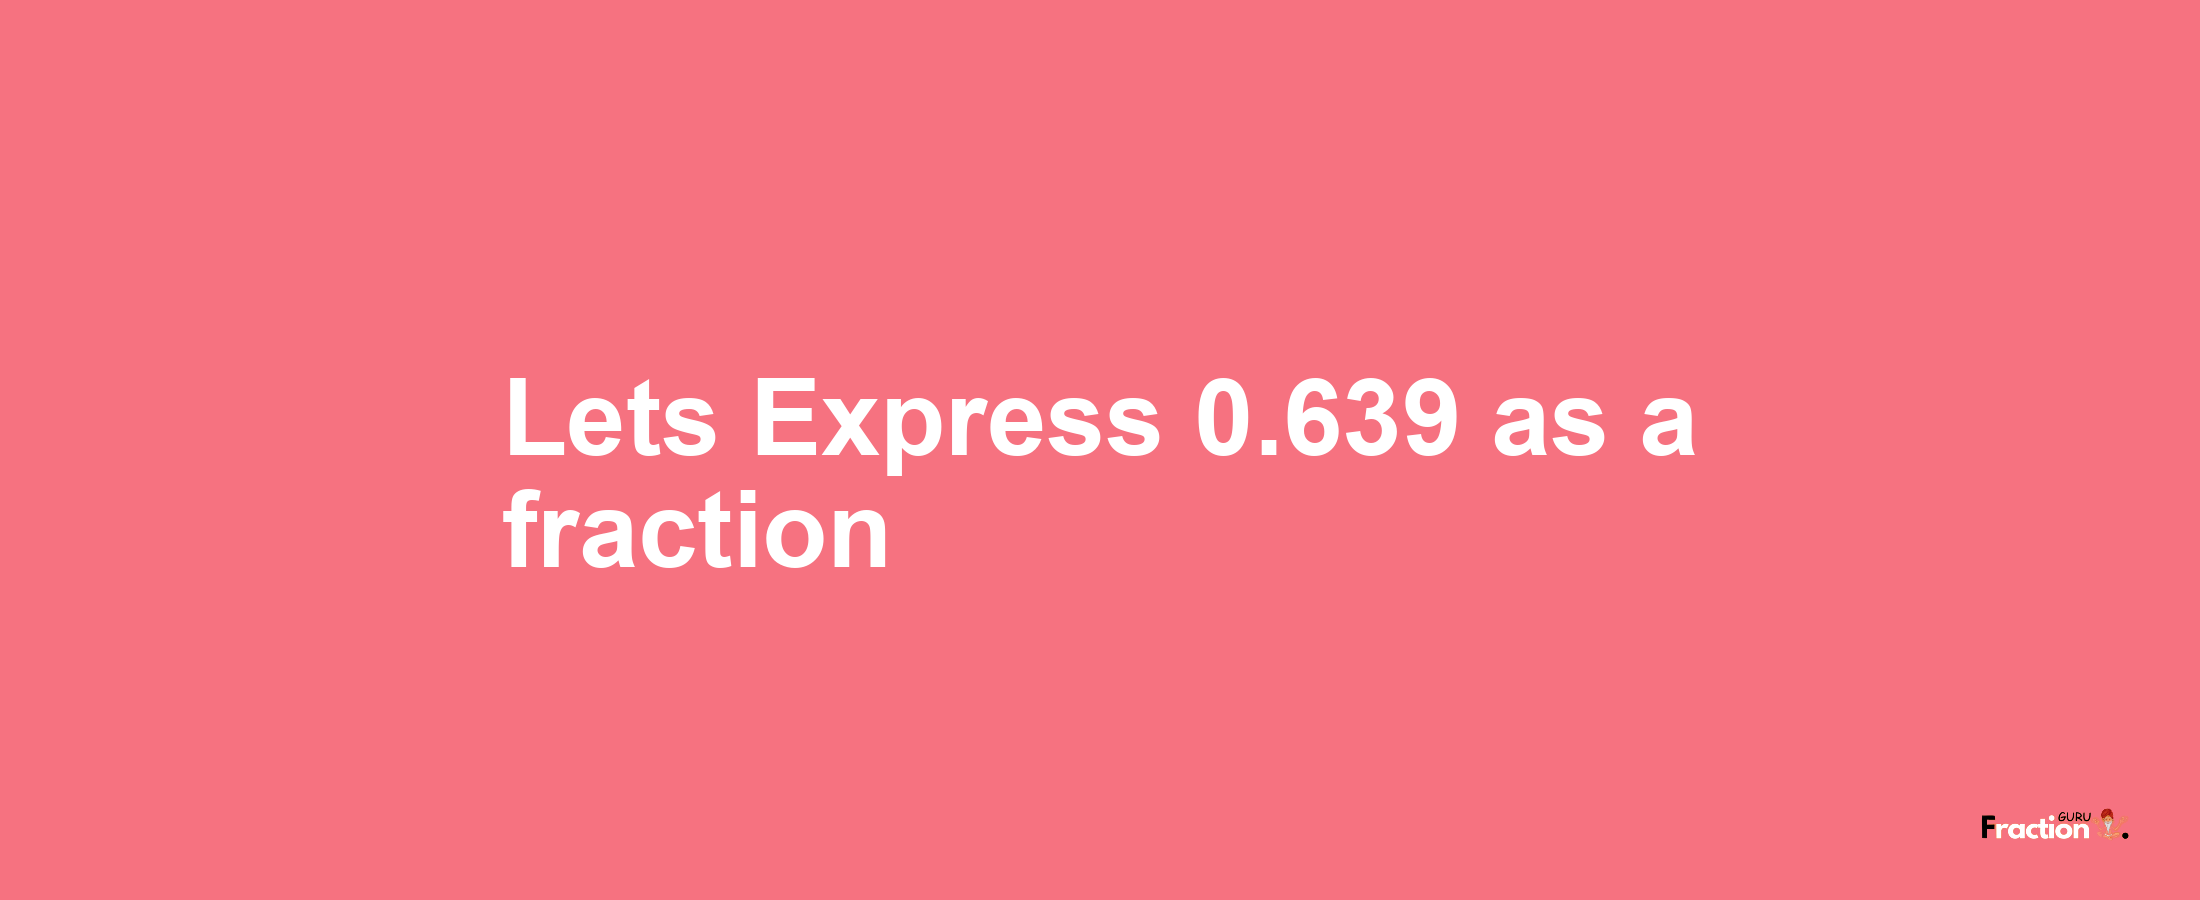 Lets Express 0.639 as afraction